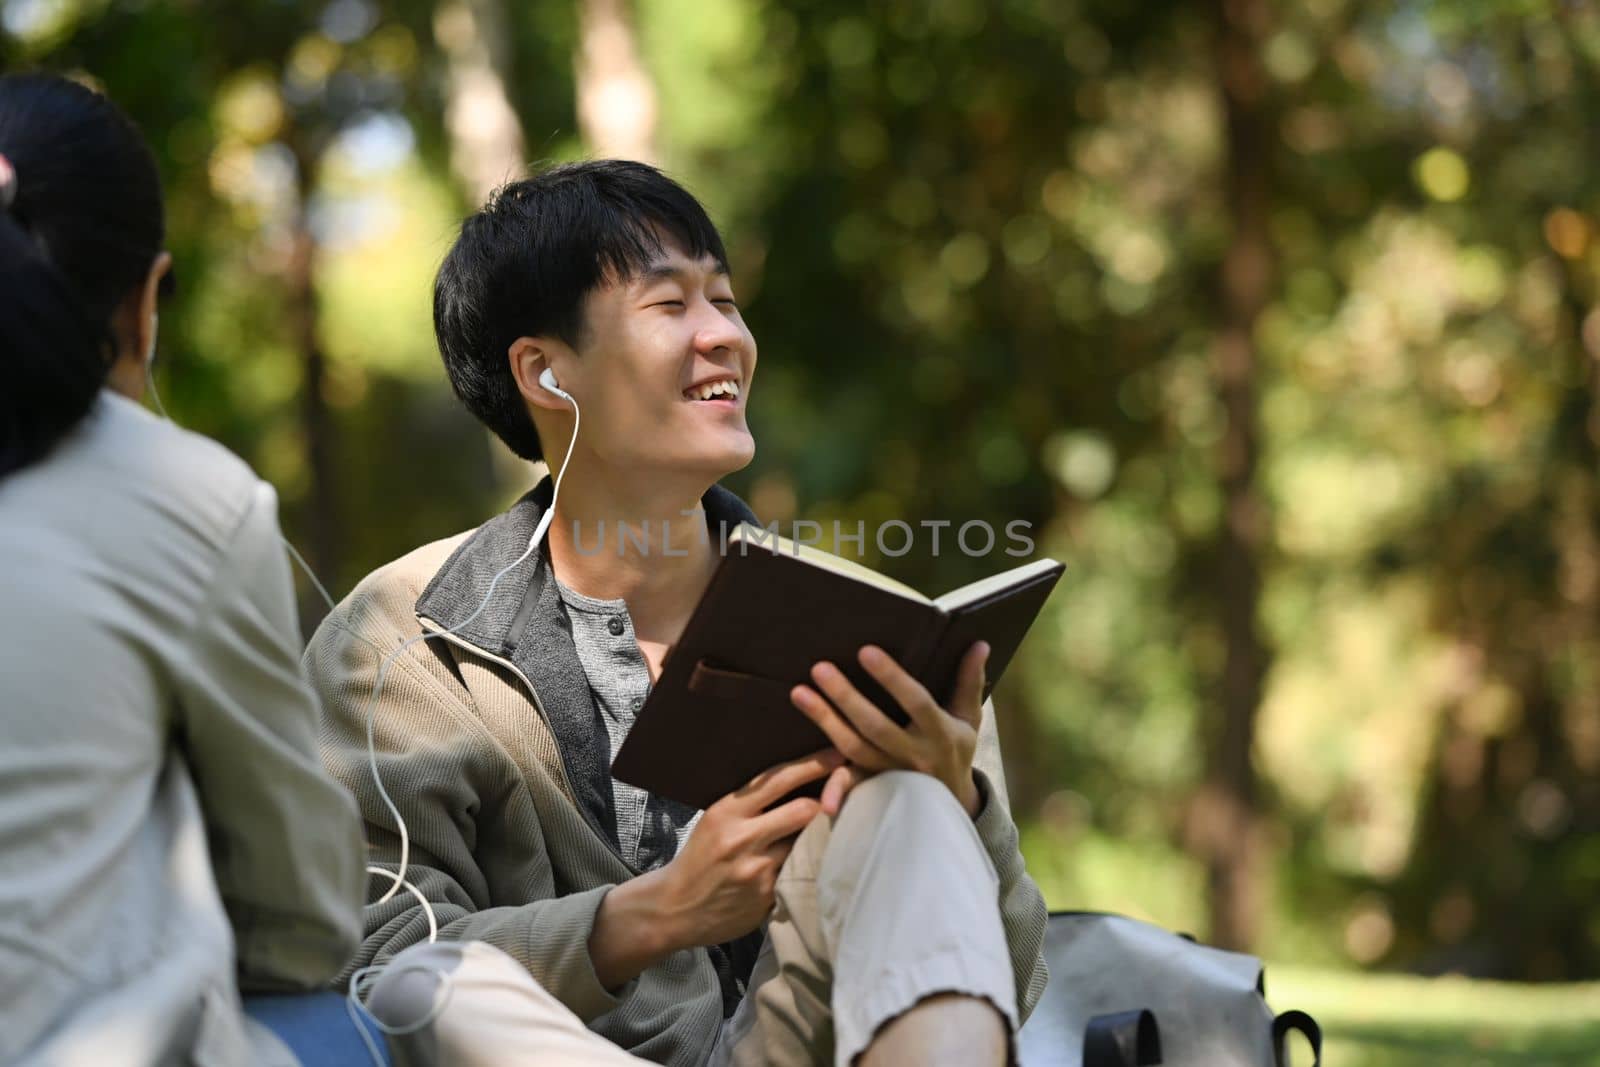 Lovely young couple sitting together in the park and listening to music with earphones by prathanchorruangsak